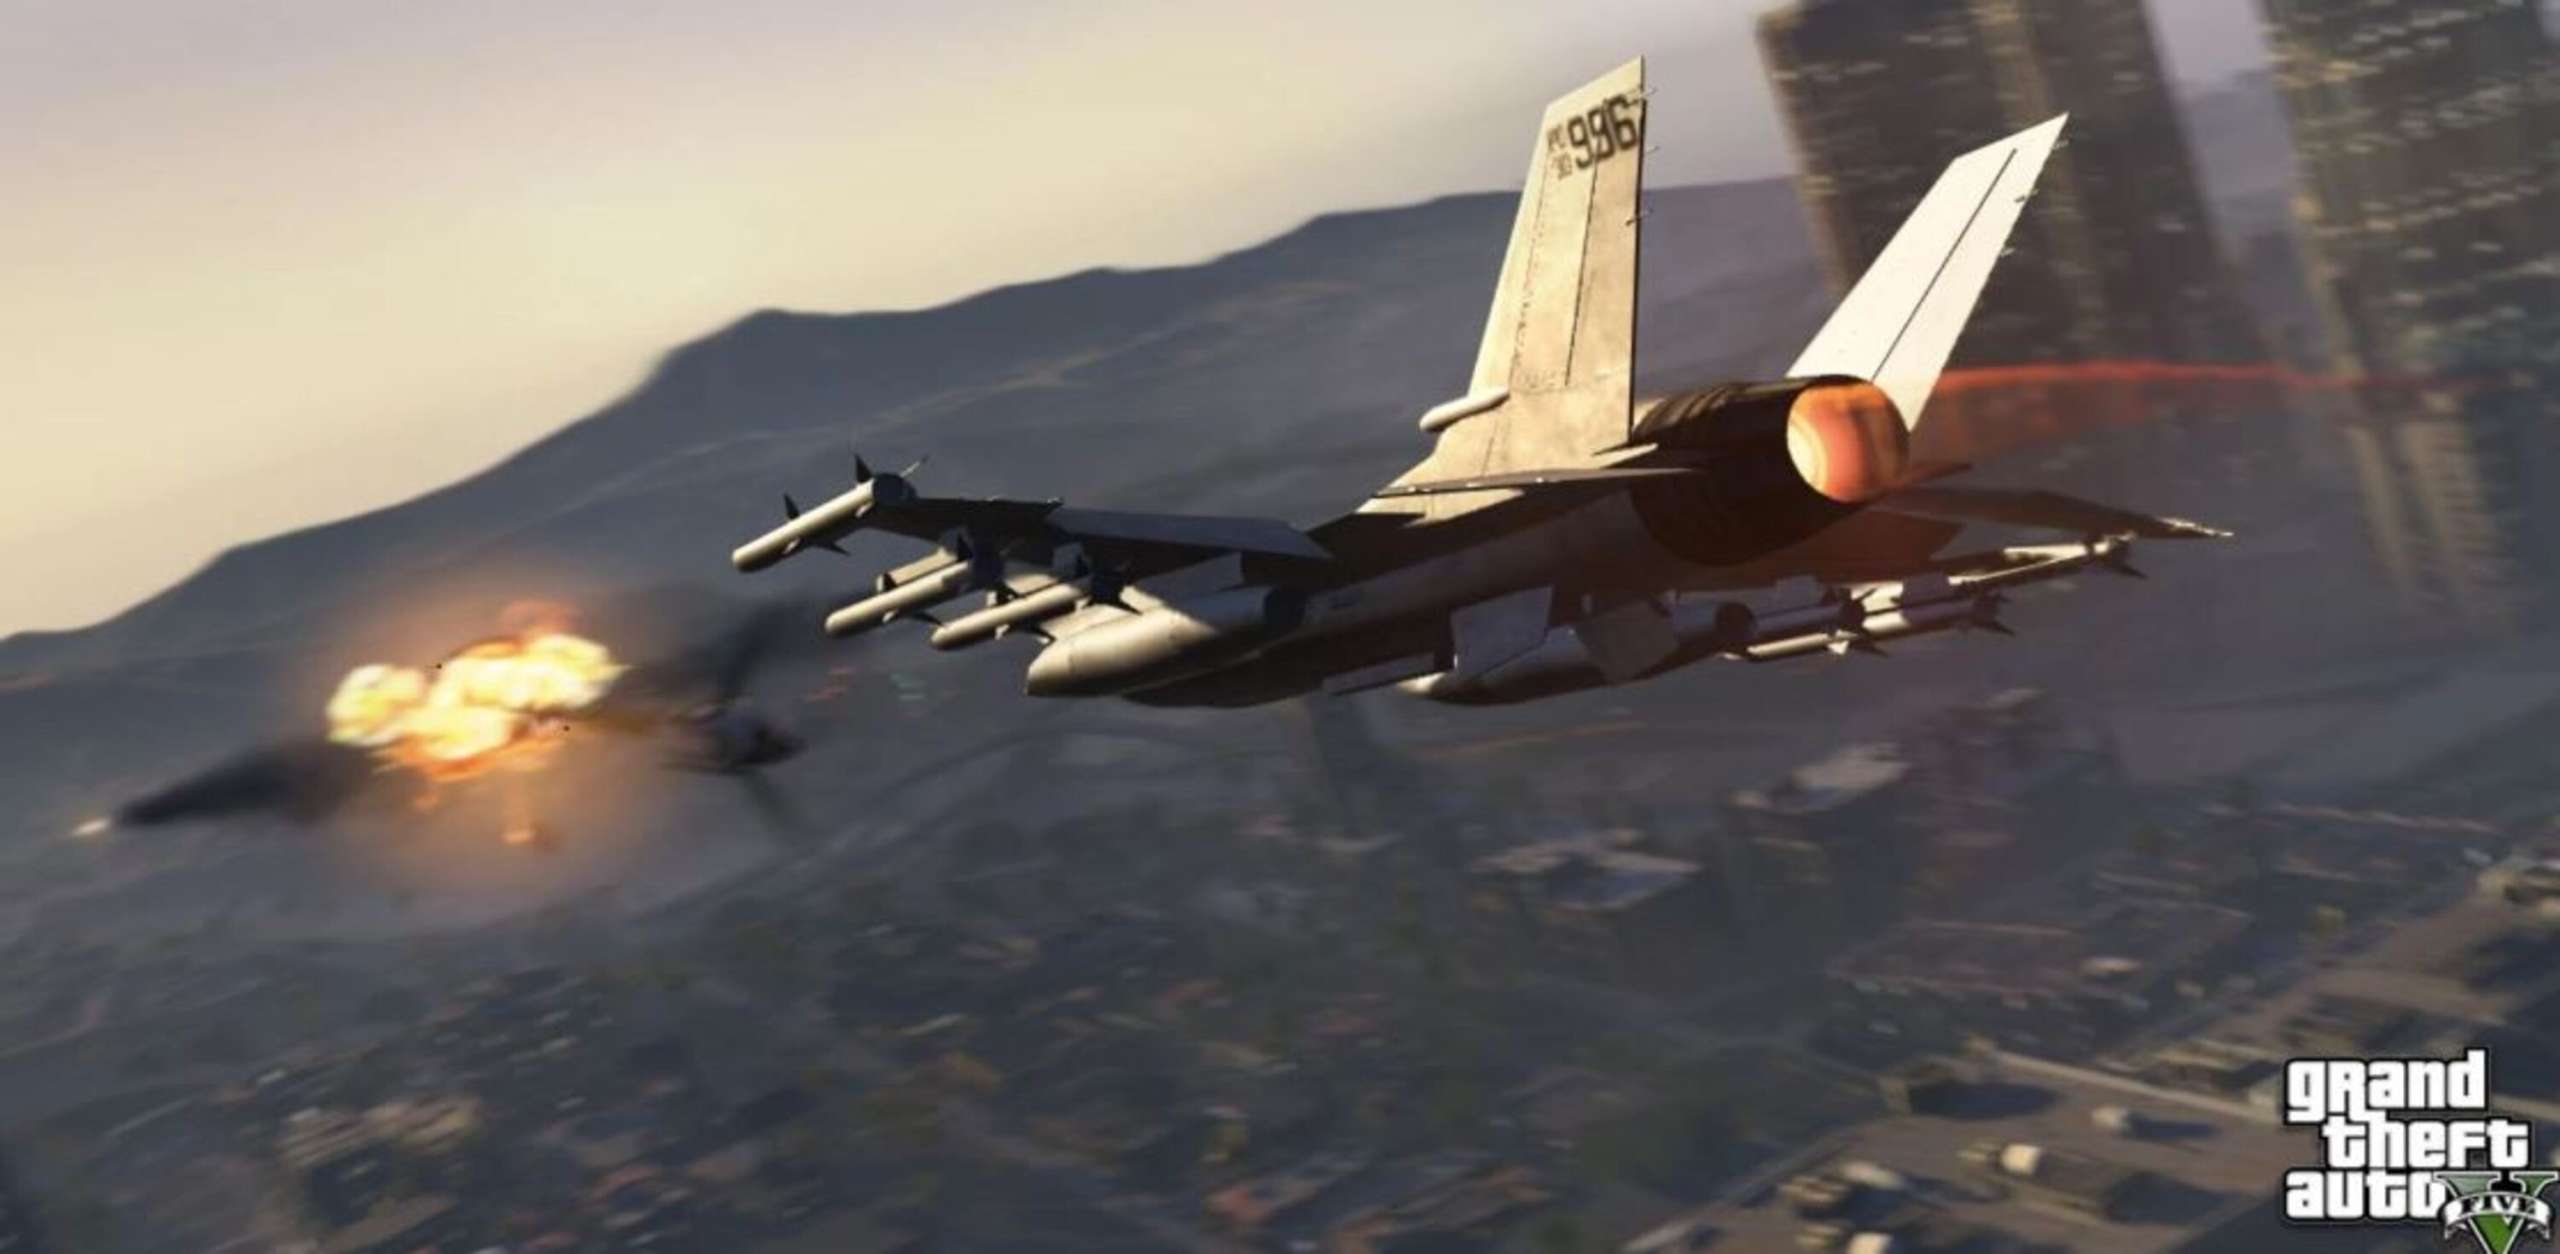 A GTA Grand Theft Auto Online Player Makes The Closest Of Calls As Hming Missile Locks On And Stalks Their Military Jet